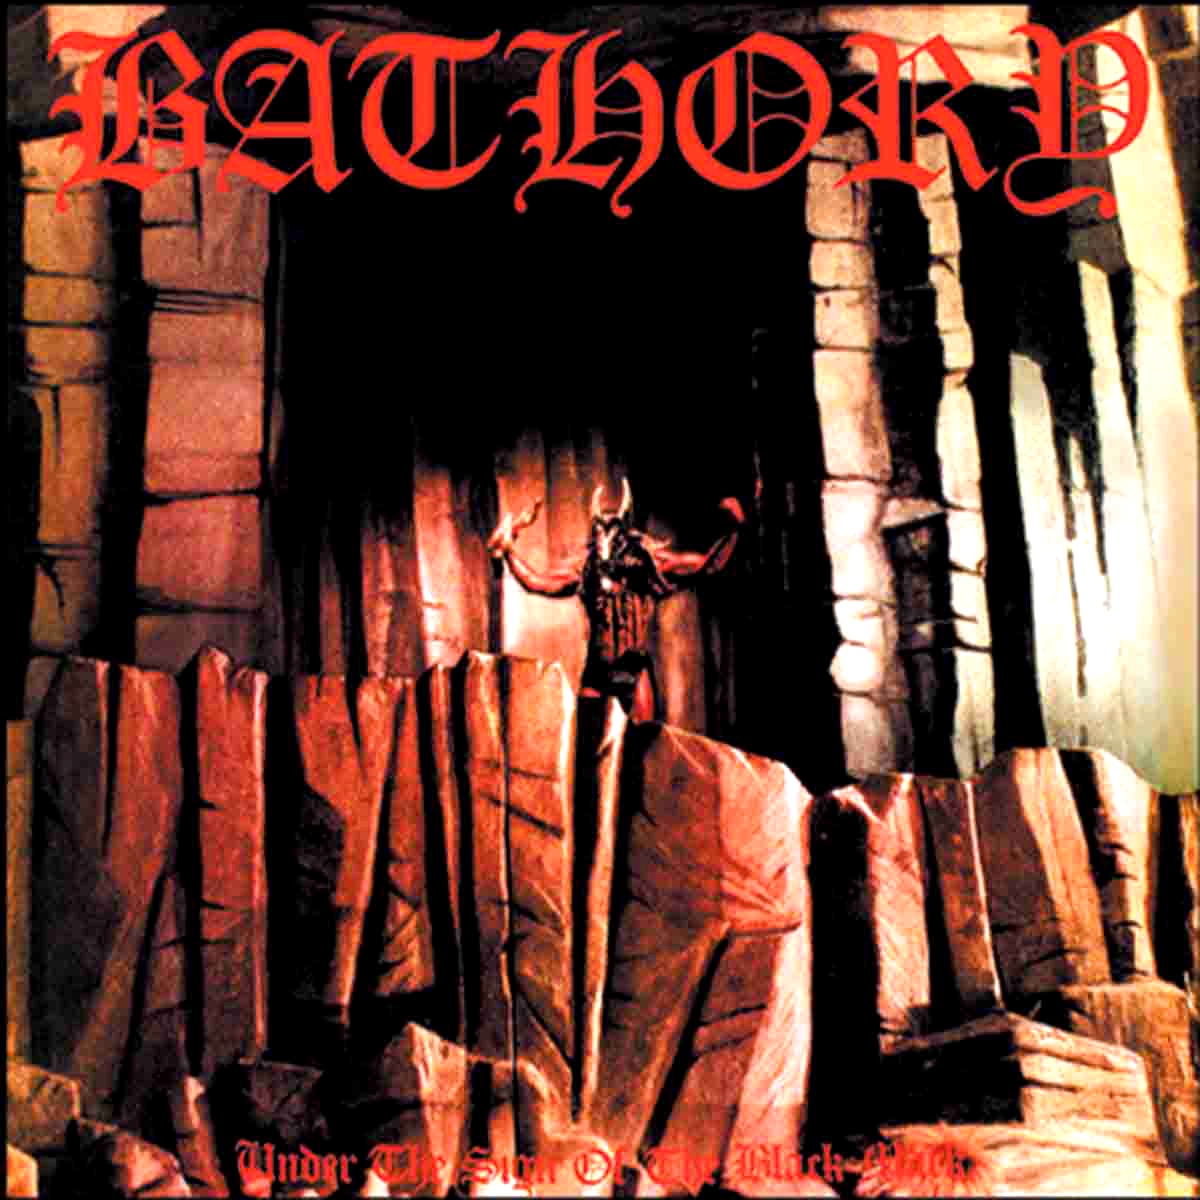 Under The Sign Of The Black Mark by Bathory